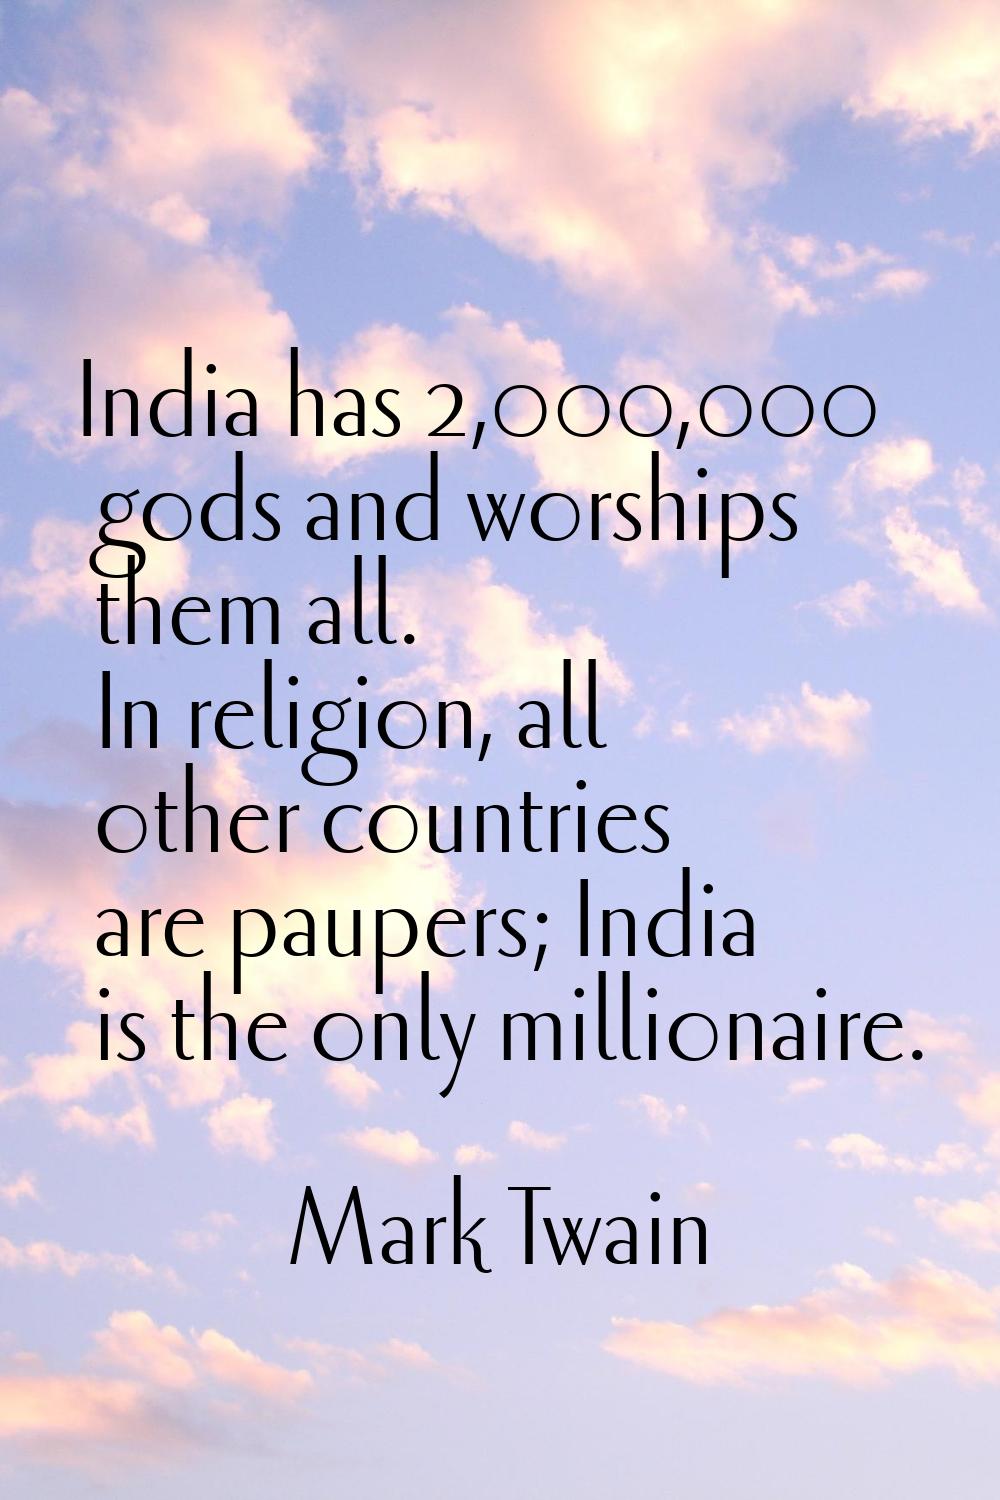 India has 2,000,000 gods and worships them all. In religion, all other countries are paupers; India